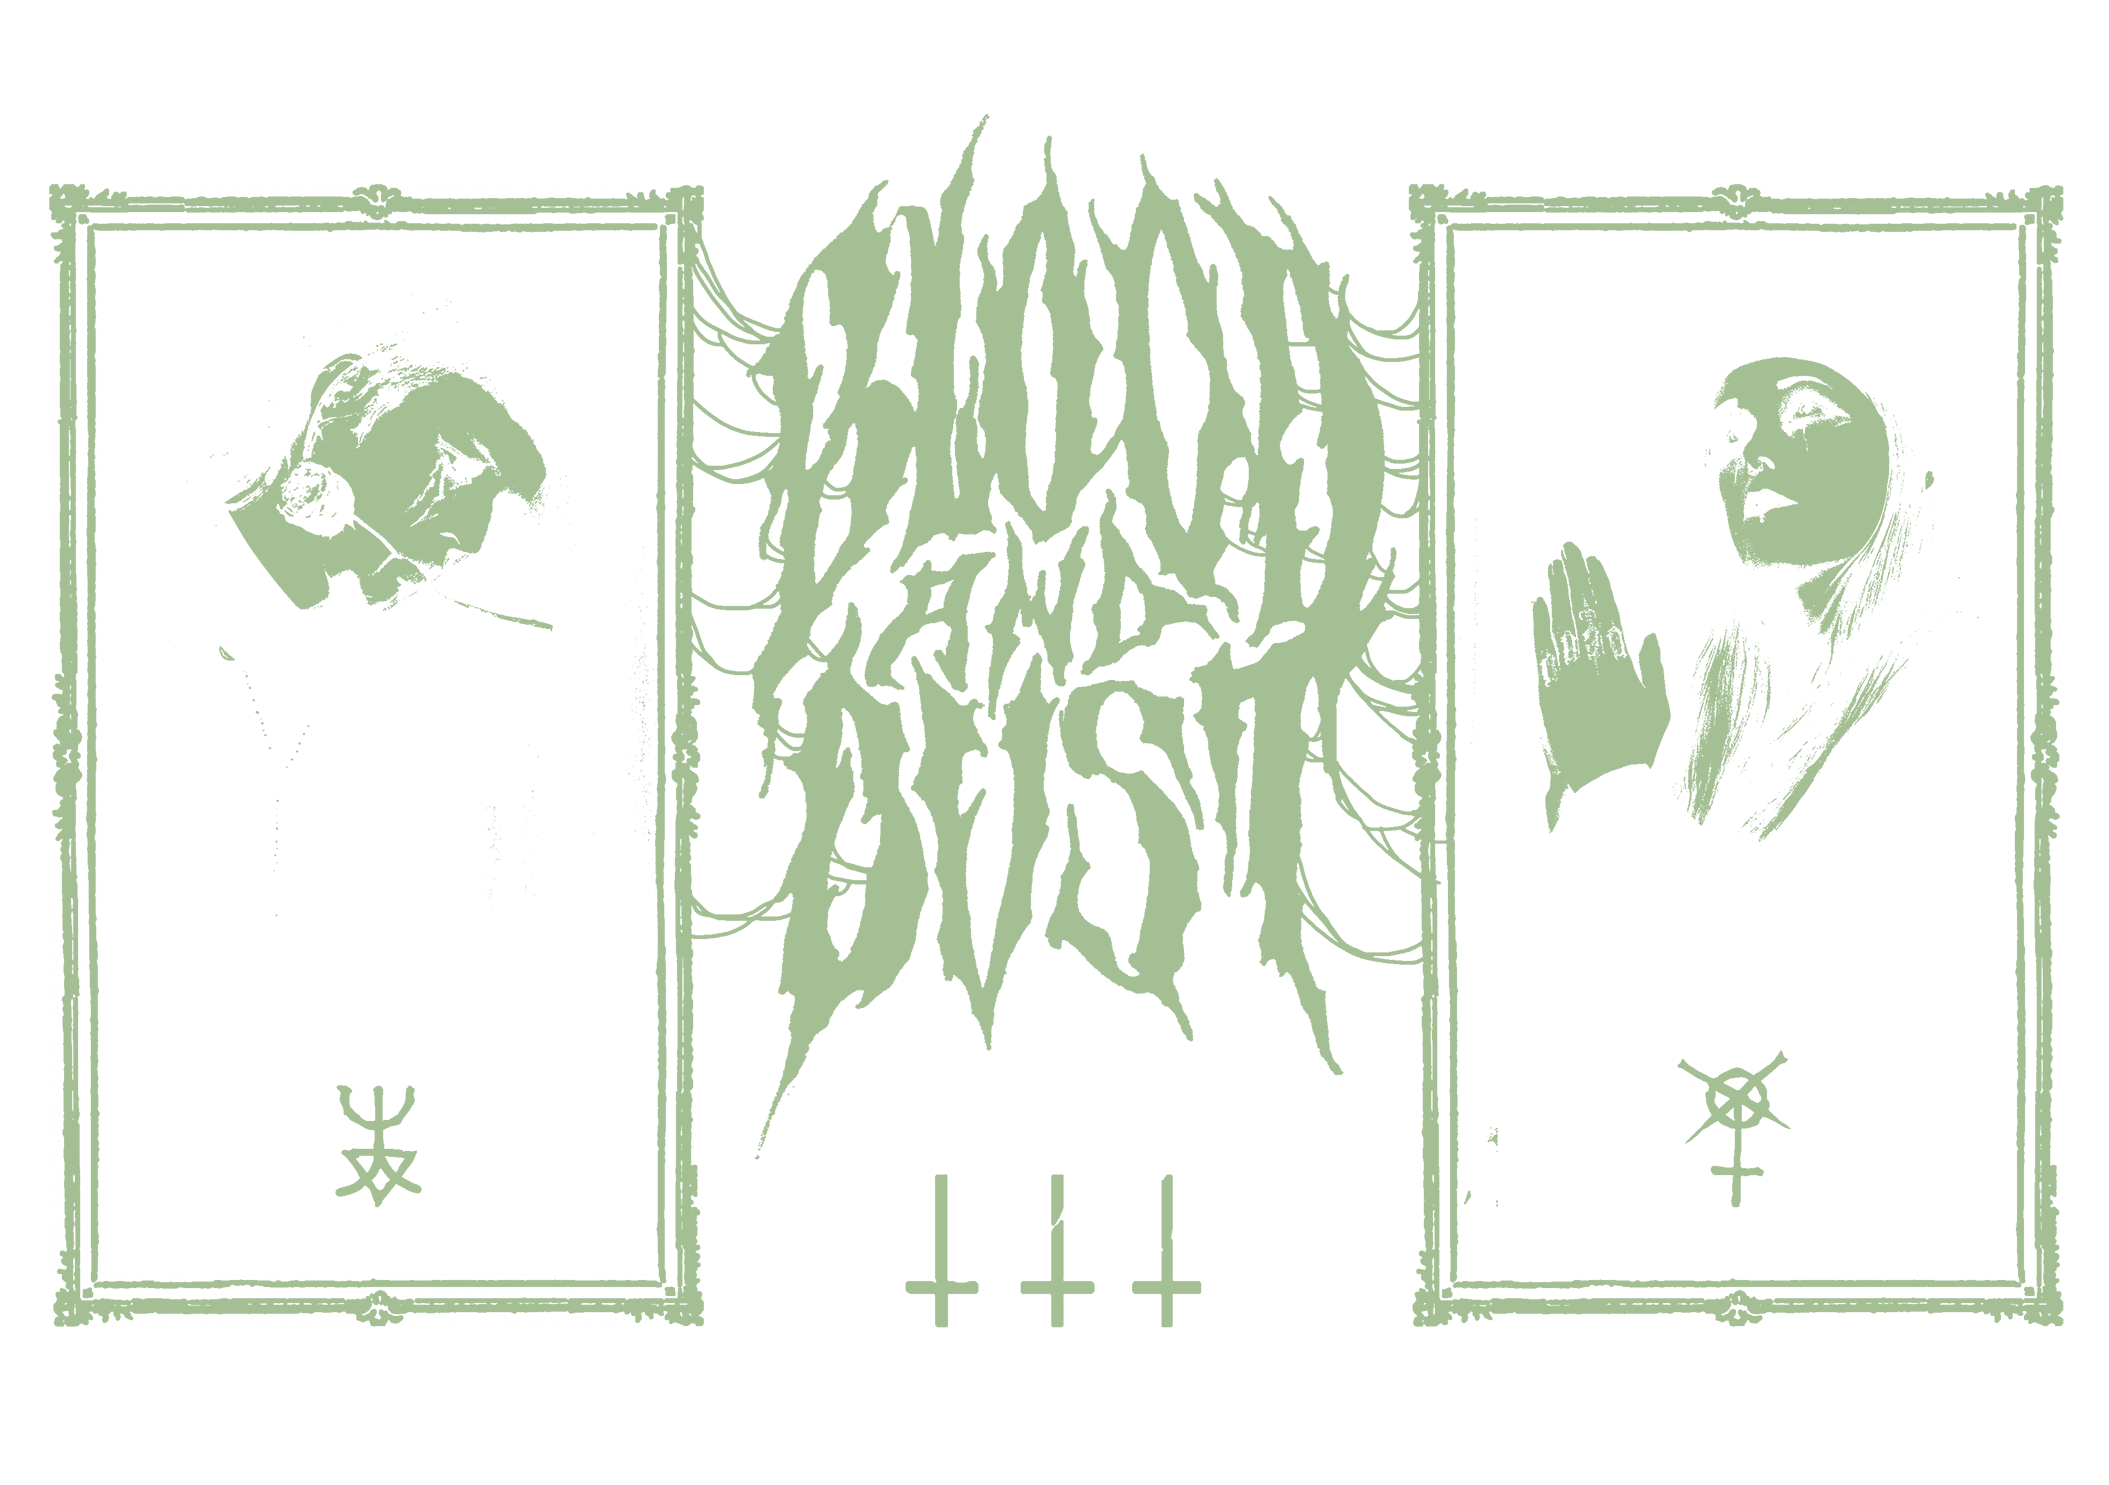 The Blood and Dust logo drawn in a black metal style between two ornate frames containing pictures of Hayley and Lizbeth along with their corresponding occult symbol.